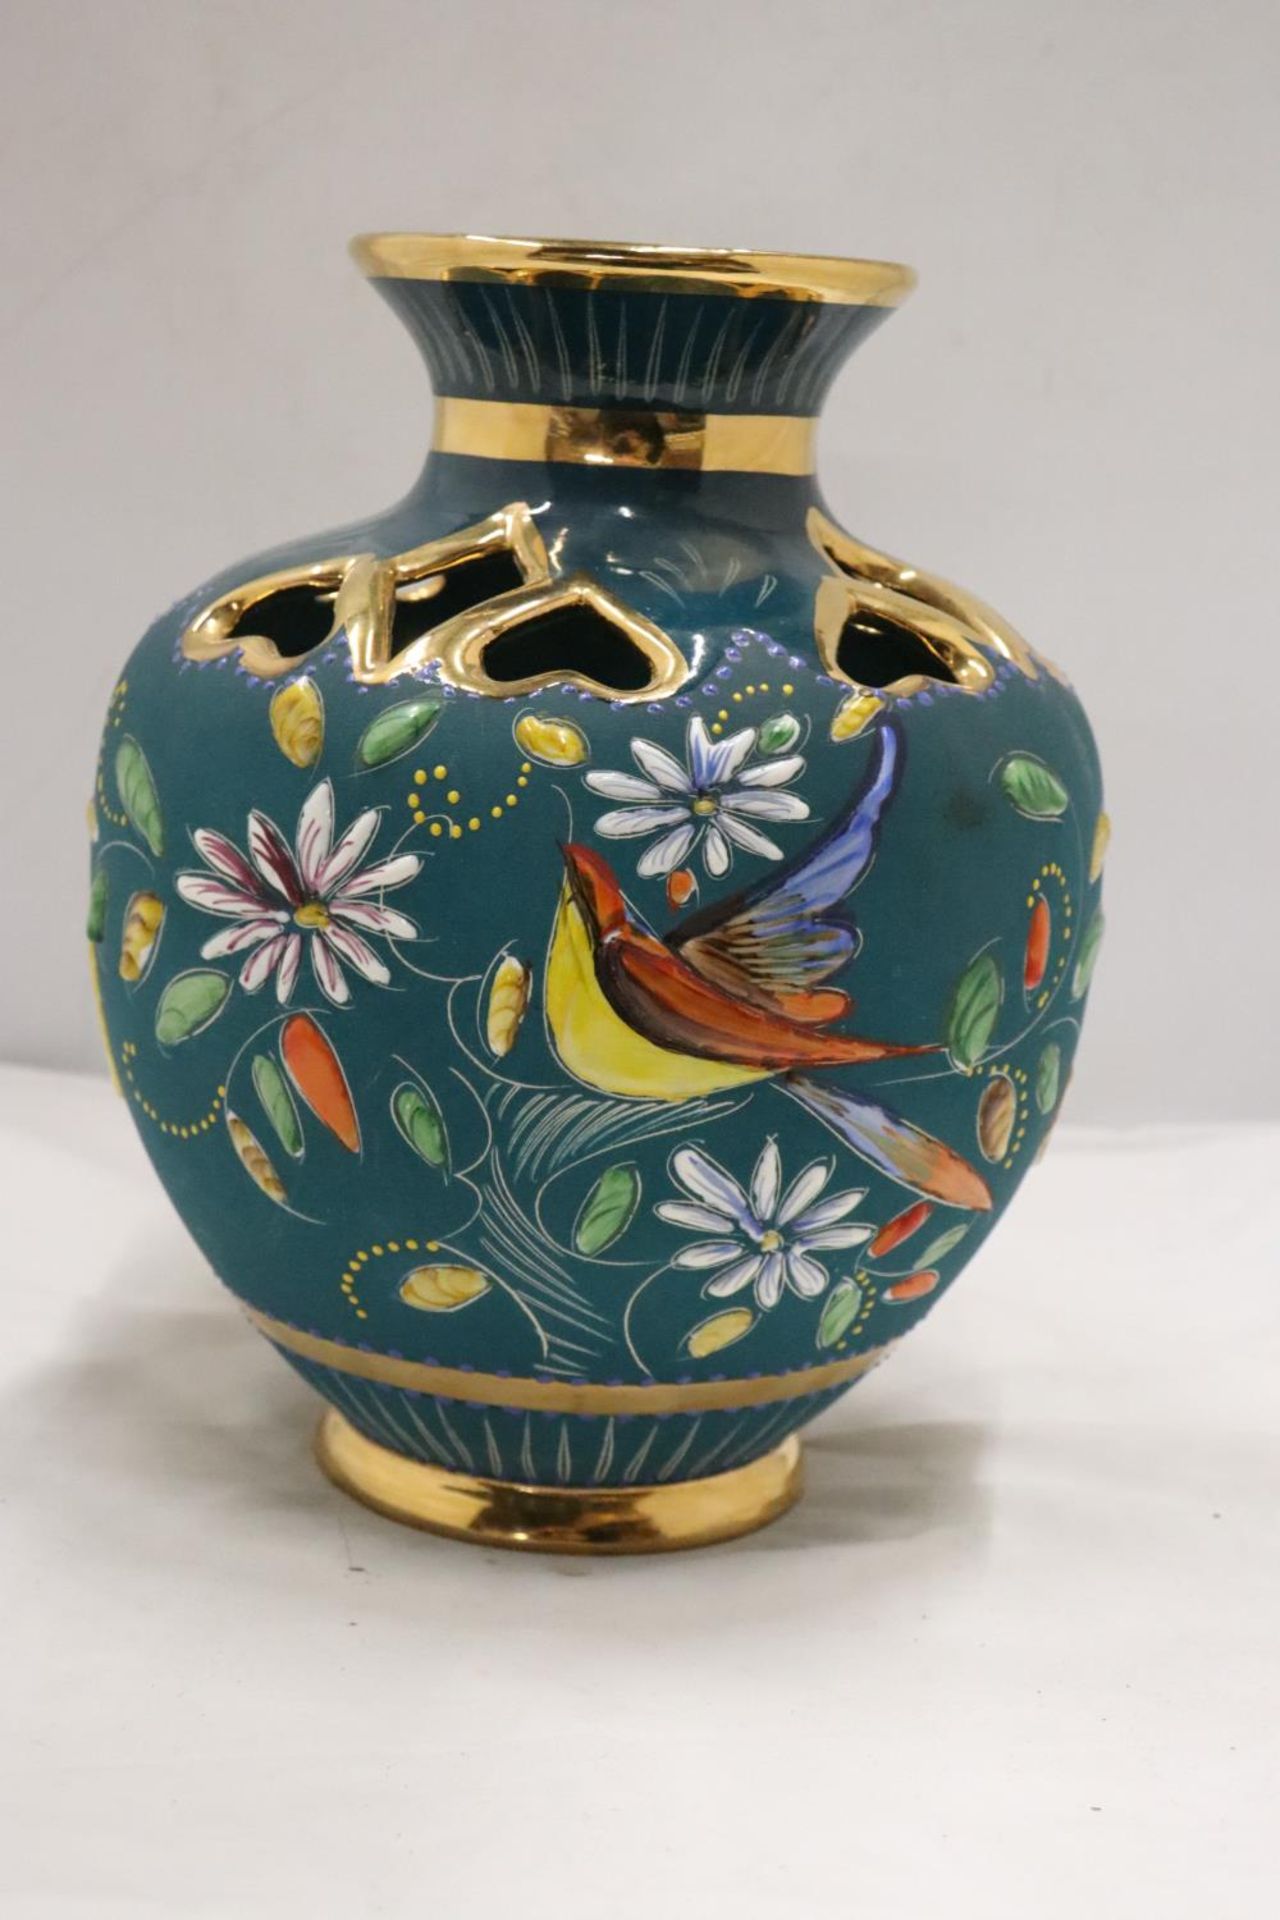 A CONTINENTAL TEAL BLUE VASE WITH THE MARK HB, QUAREGNON, BELGIUM TO THE BASE - Image 2 of 6